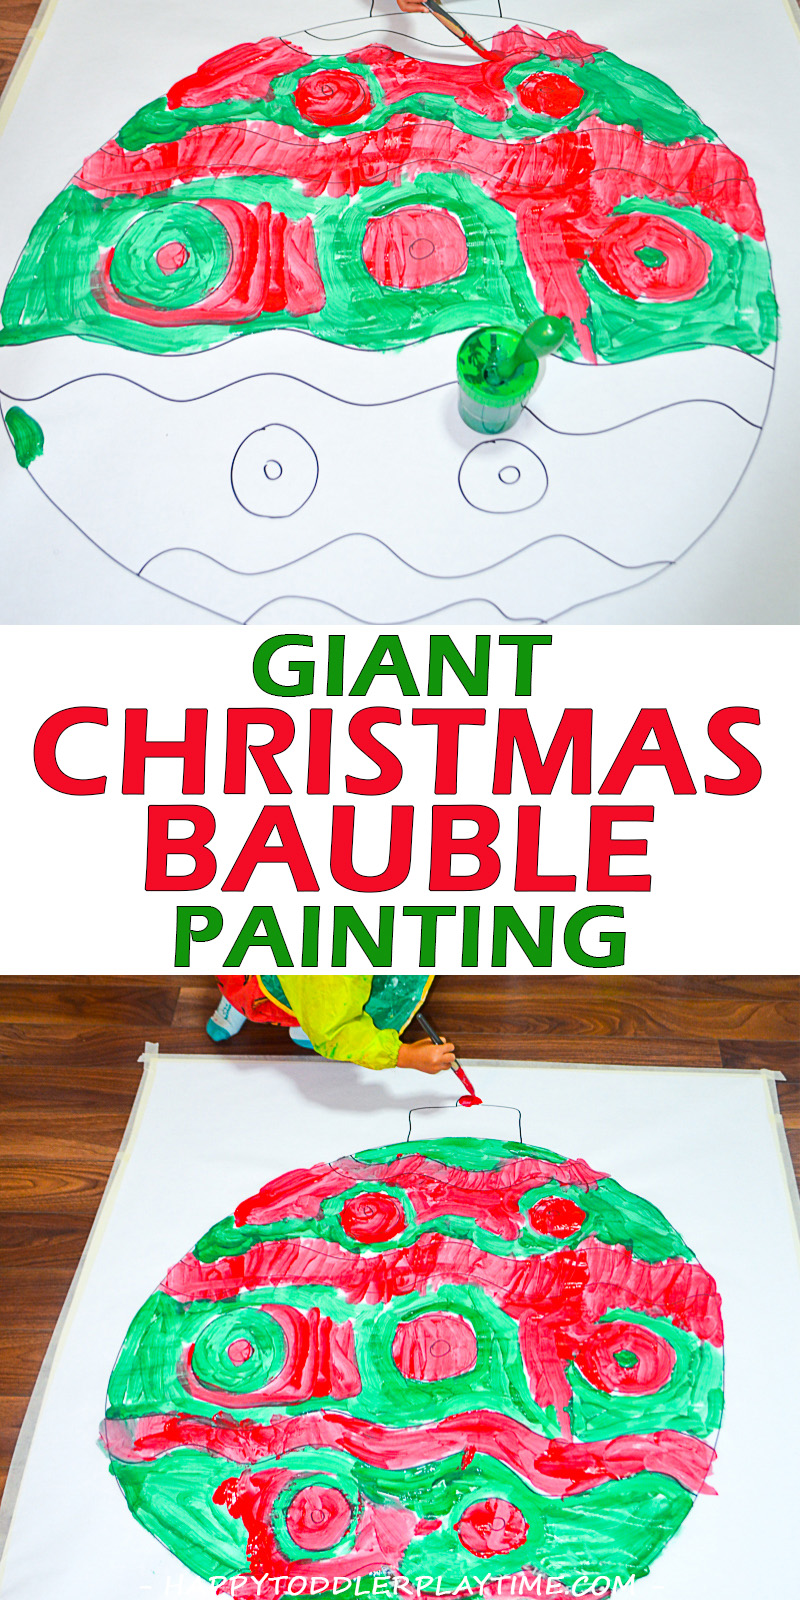 GIANT CHRISTMAS BAUBLE pin